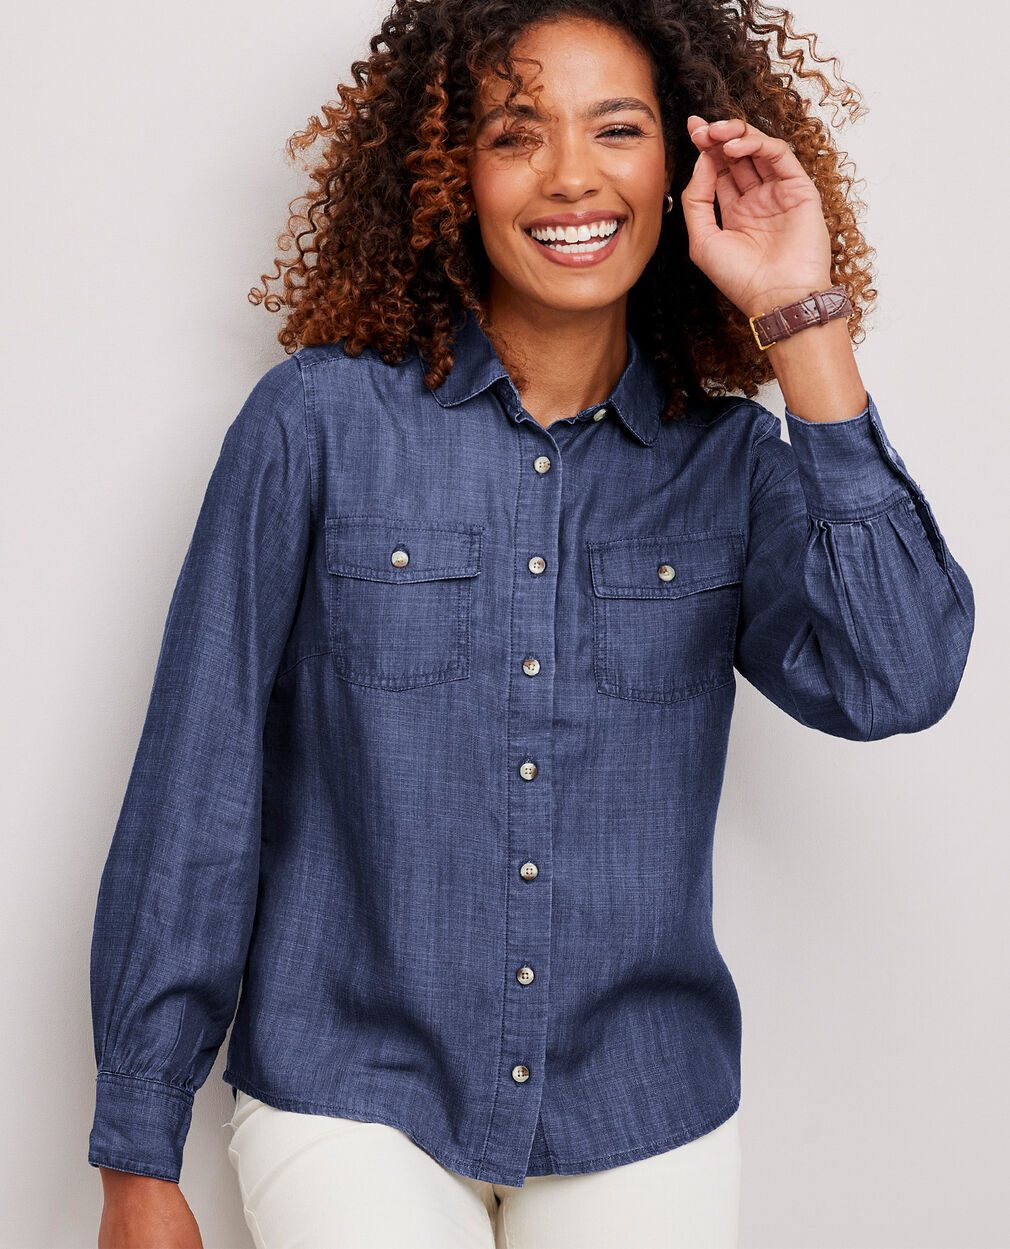 Woman laughing wearing a button-up blue denim blouse with white jeans